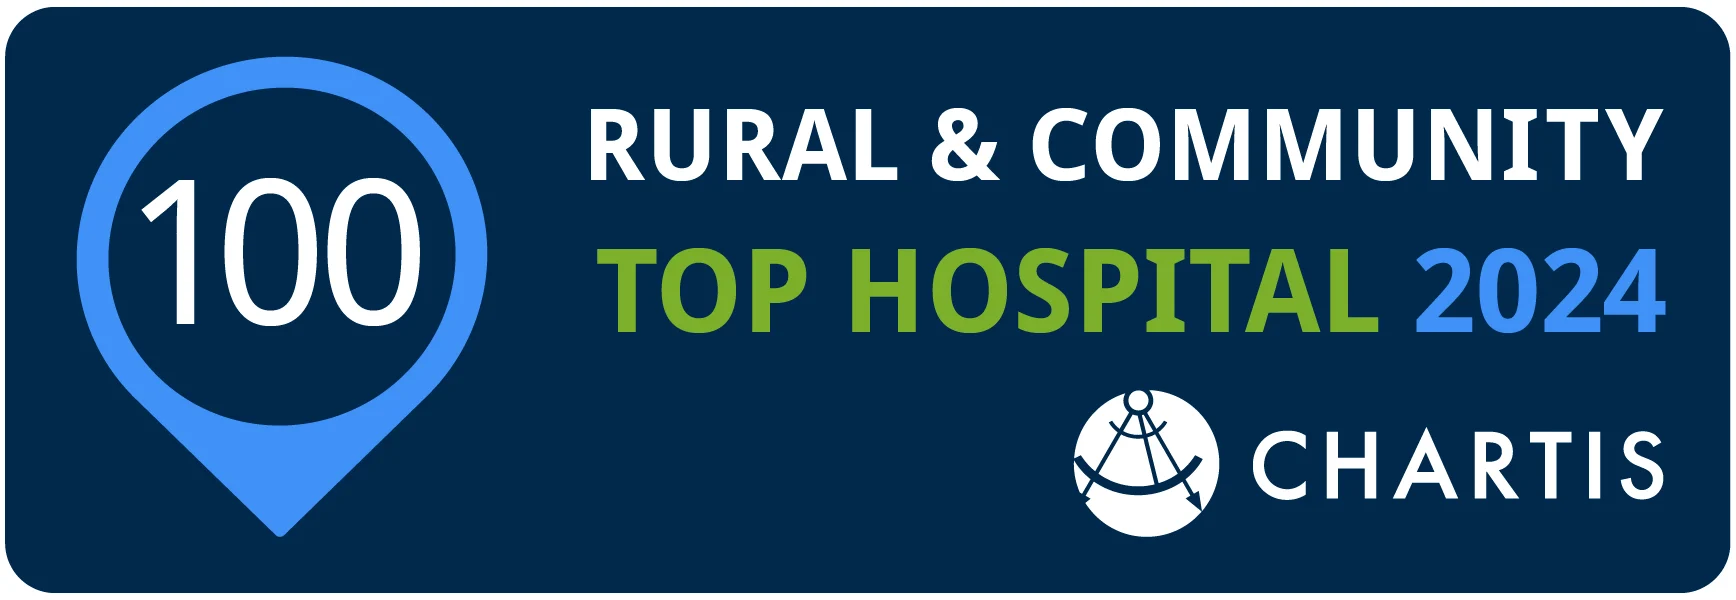 Top 100 Rural and Community Hospital 2024 Logo